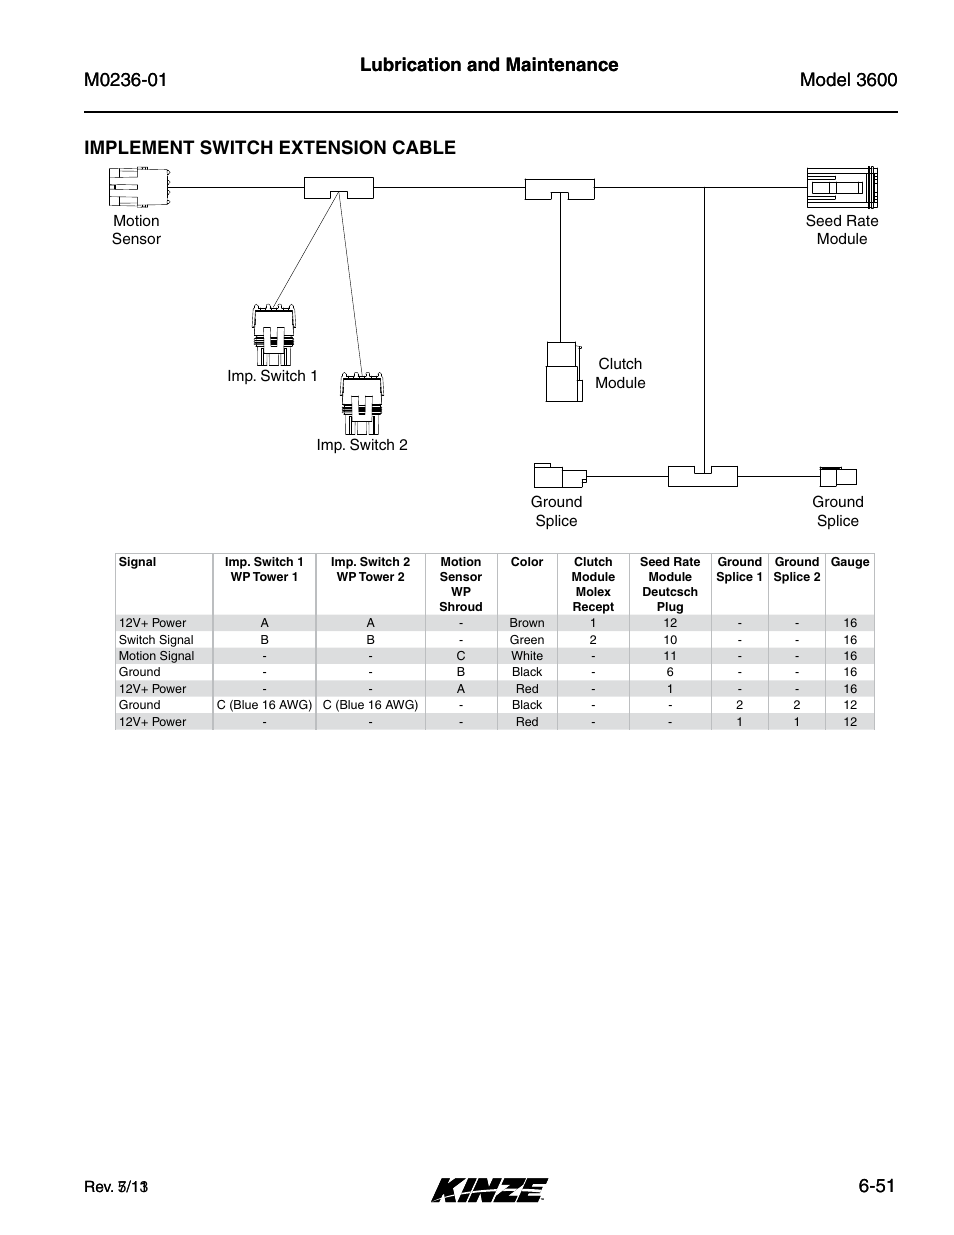 Implement switch extension cable, 51 lubrication and maintenance | Kinze 3600 Lift and Rotate Planter Rev. 7/14 User Manual | Page 159 / 172